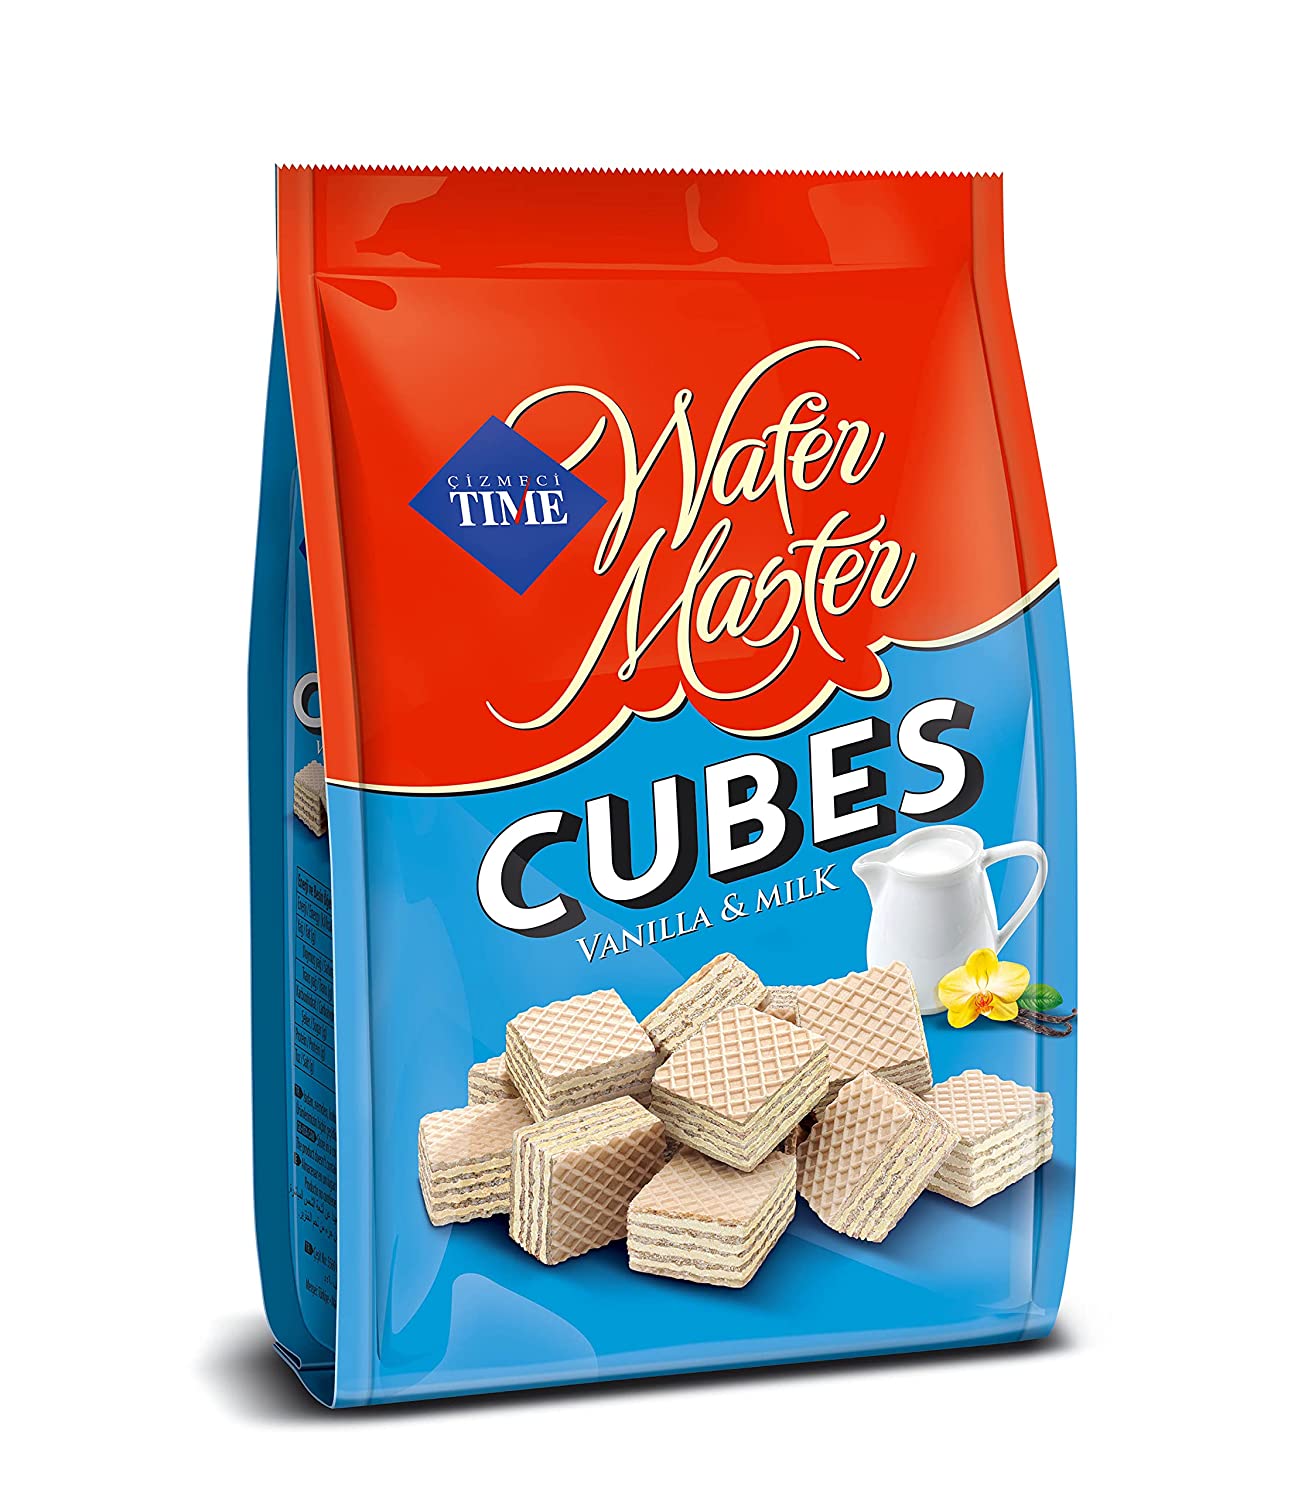 Wafer Master Cubes Milk Pouch Pack (100G) - Aytac Foods